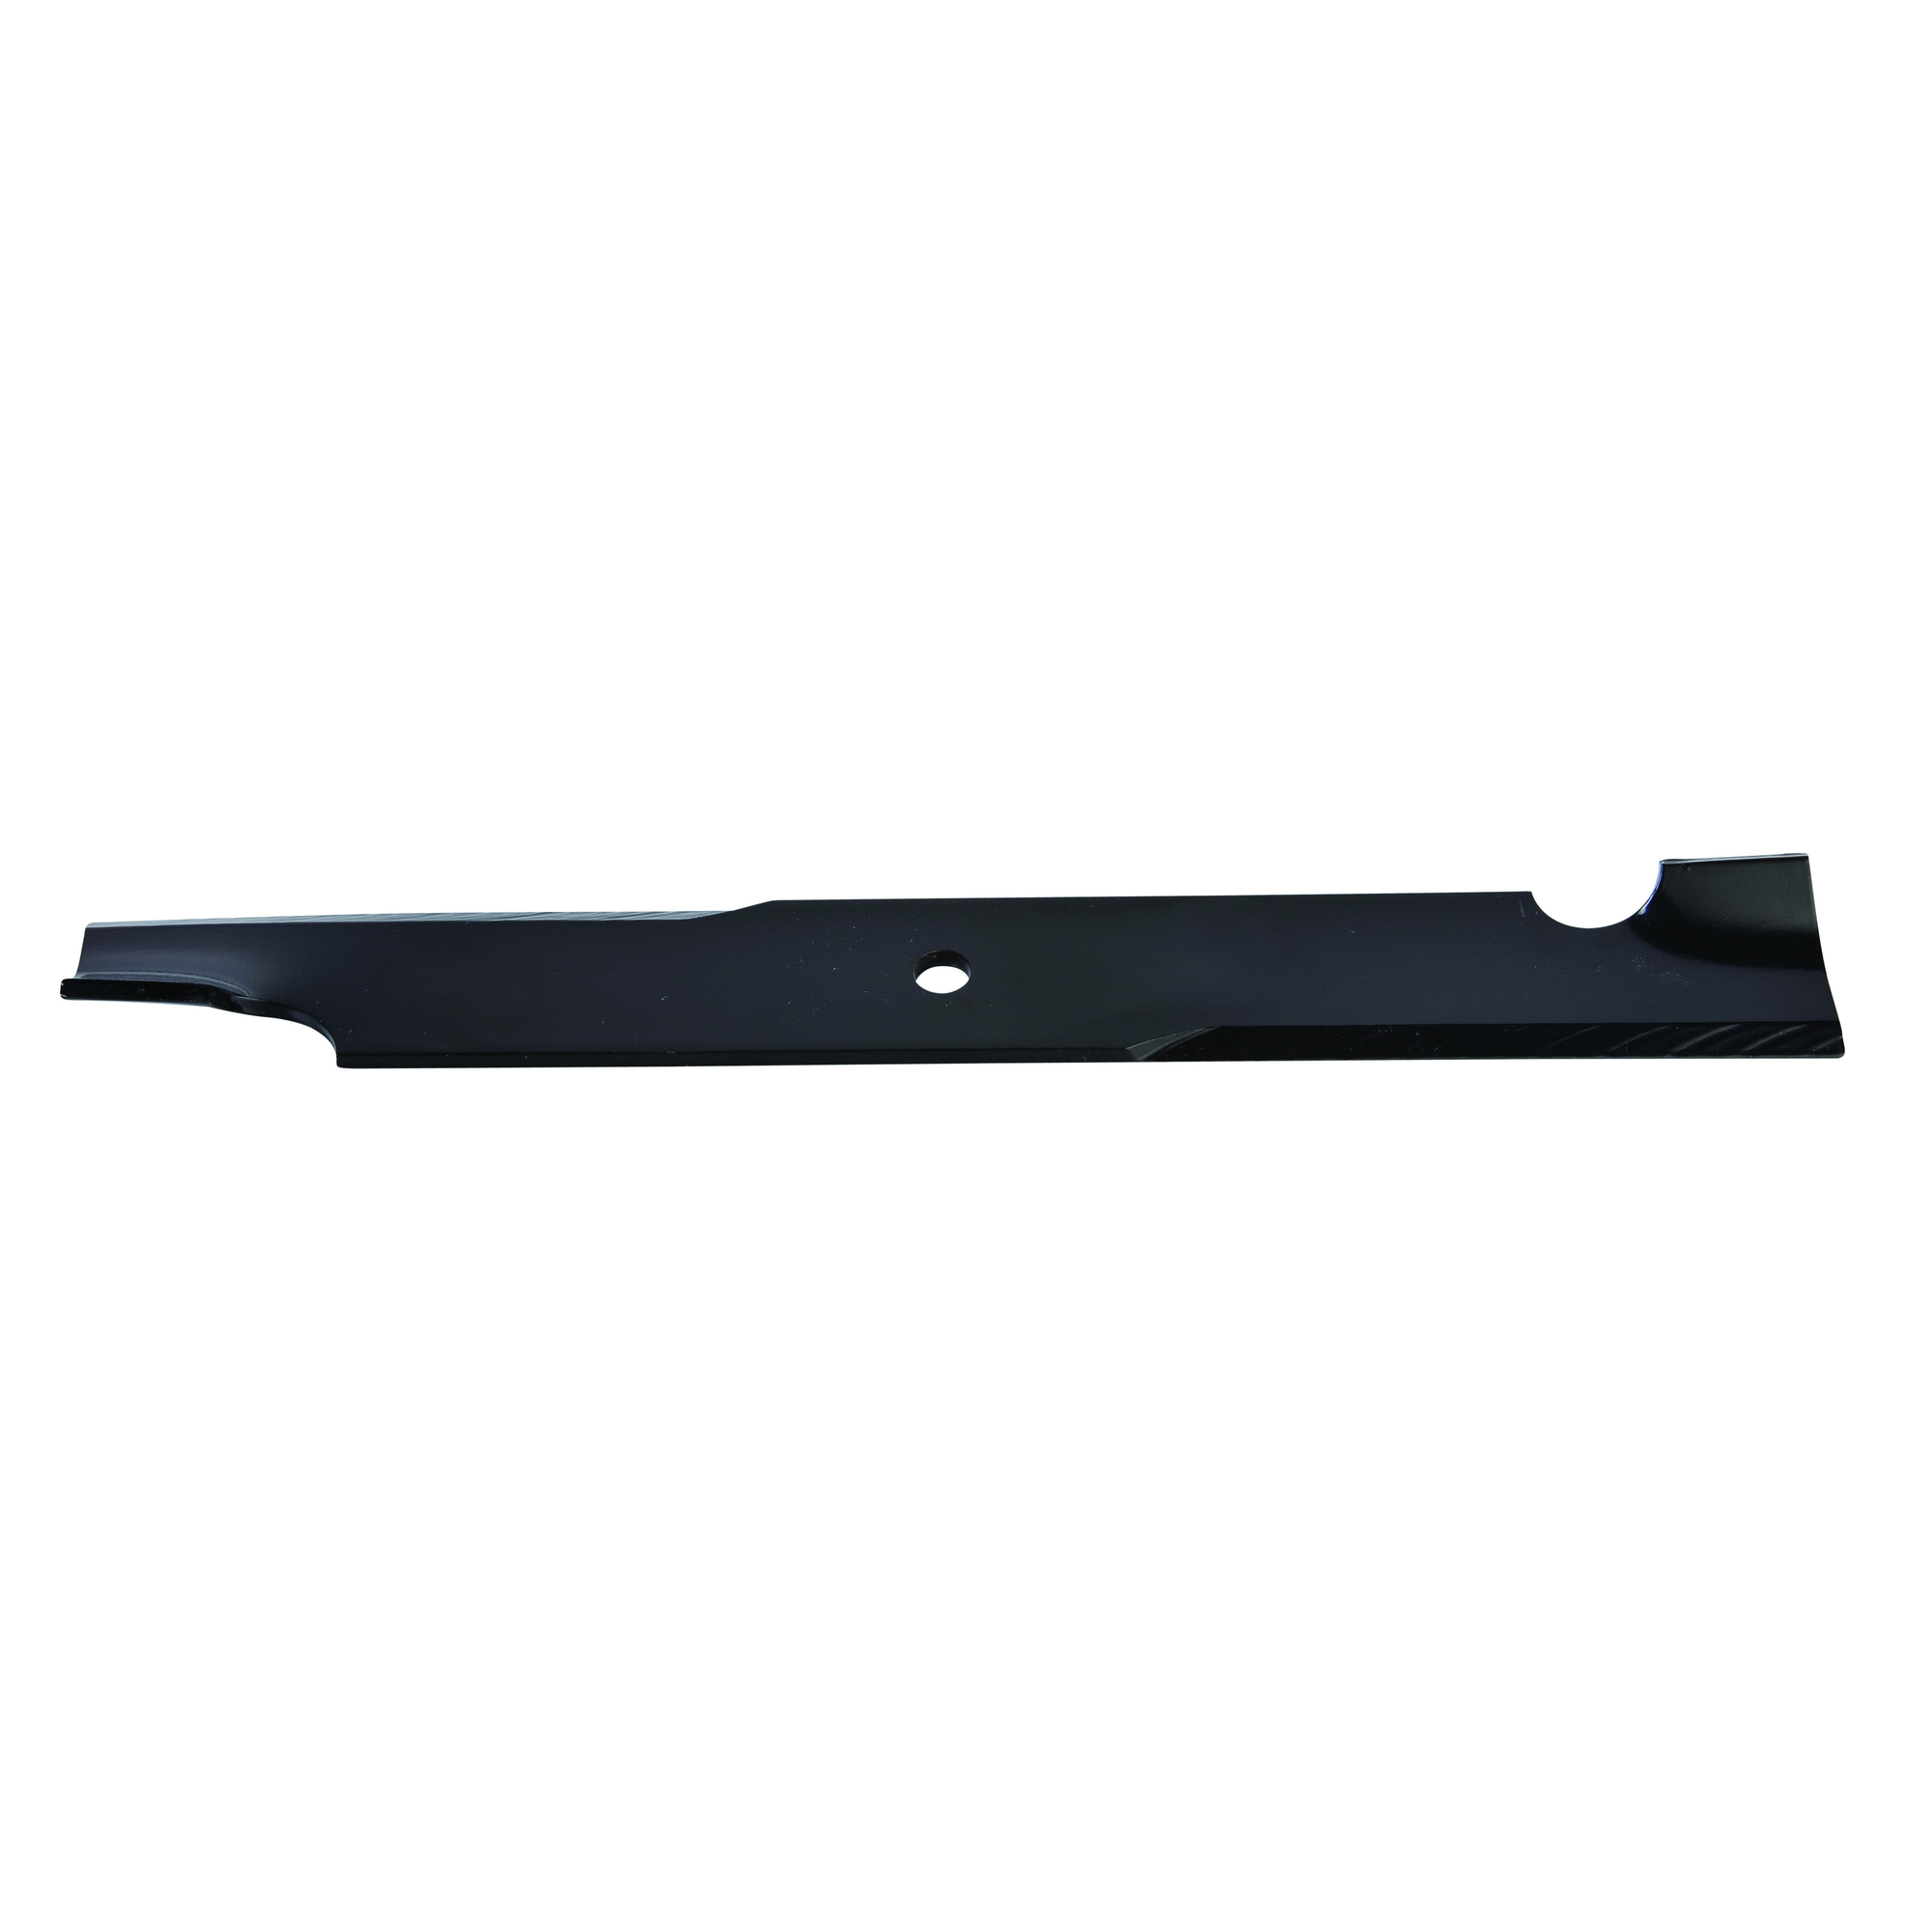 Oregon, Replacement Lawn Mower Blade, Length 19 in, Model 92-149